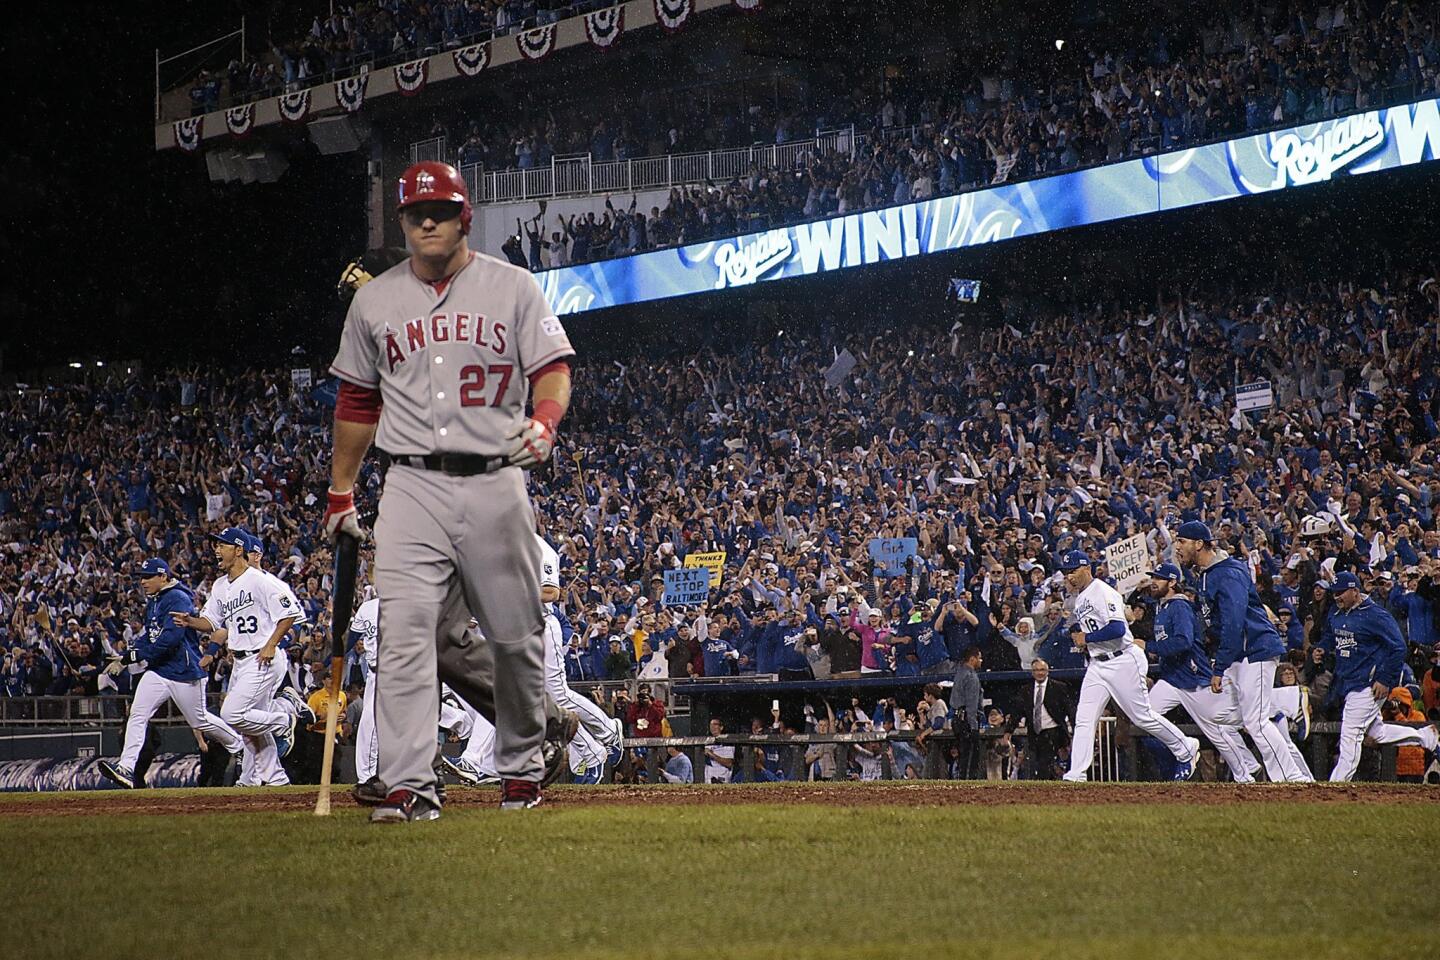 Angels center fielder Mike Trout walks to the dugout as the Kansas City Royals celebrate their series-clinch victory in Game 3 of the ALDS on Sunday.